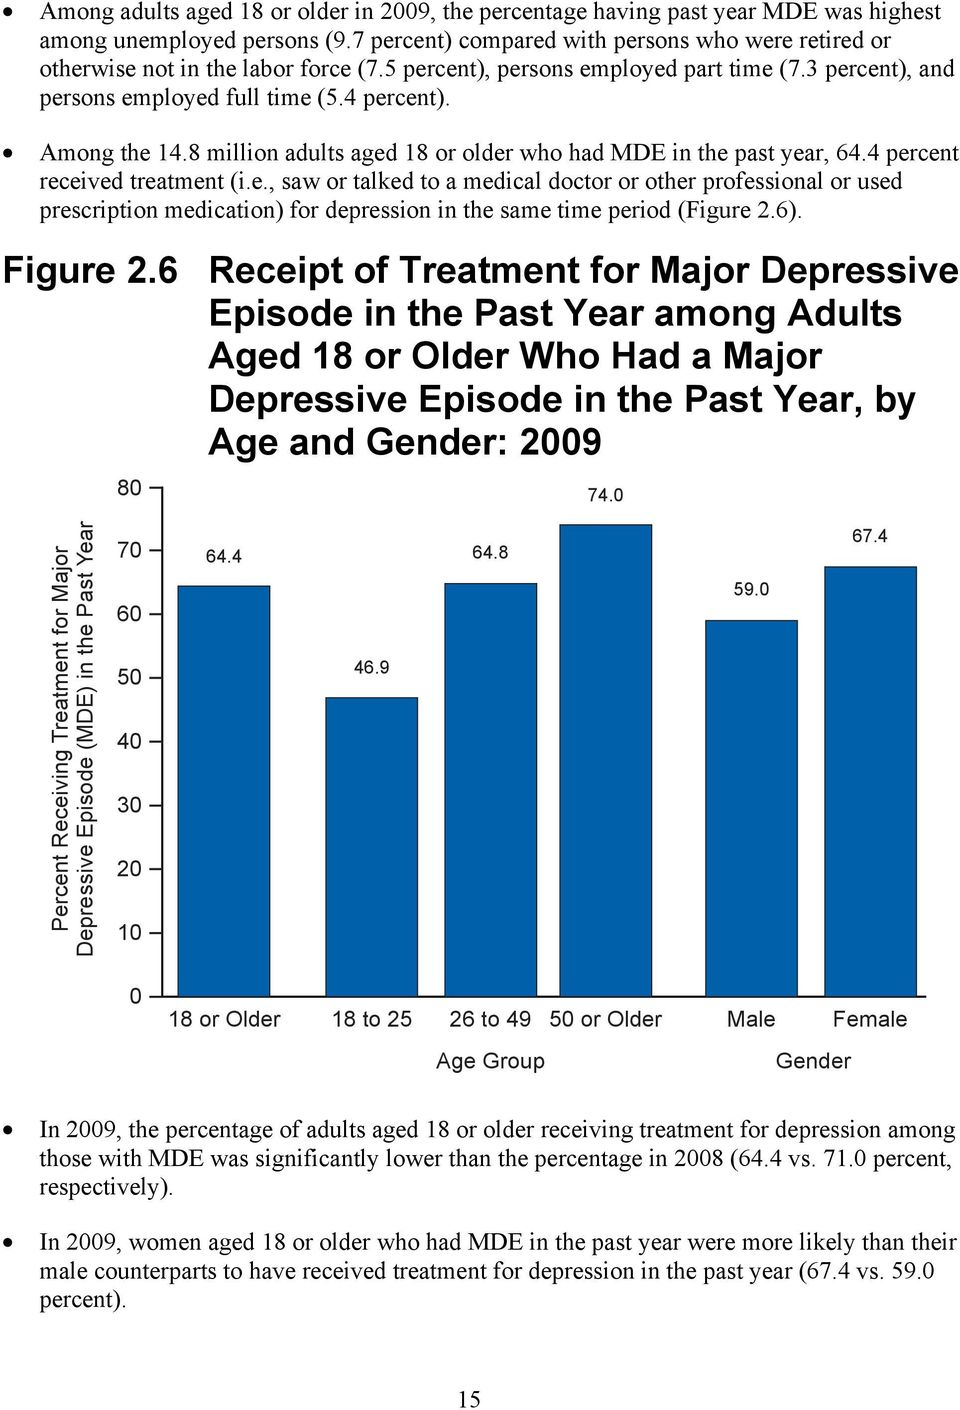 Among the 14.8 million adults aged 18 or older who had MDE in the past year, 64.4 percent received treatment (i.e., saw or talked to a medical doctor or other professional or used prescription medication) for depression in the same time period (Figure 2.